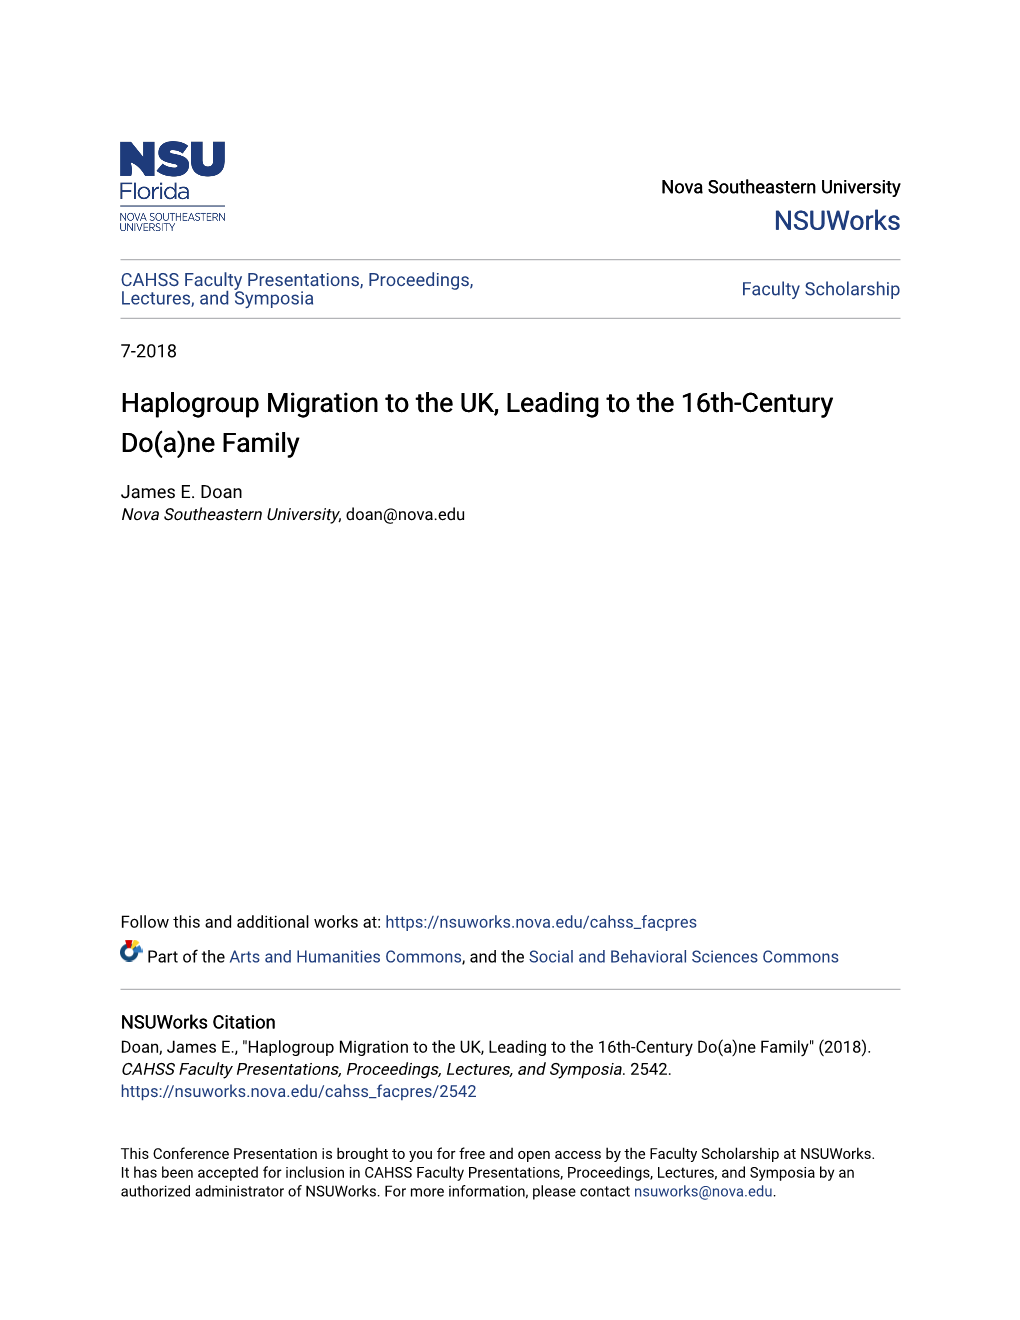 Haplogroup Migration to the UK, Leading to the 16Th-Century Do(A)Ne Family